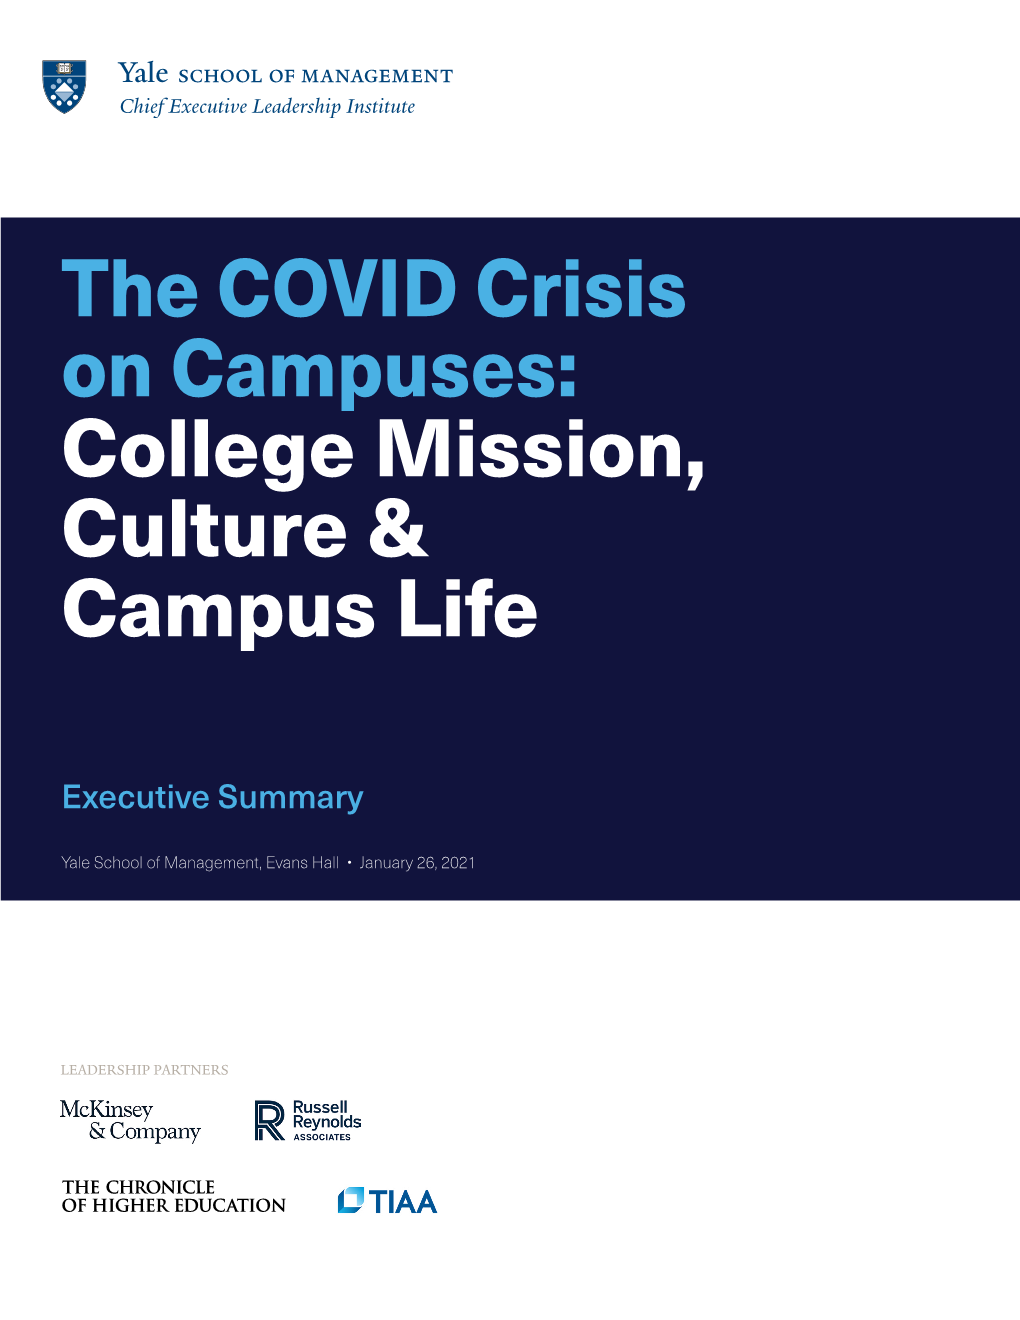 The COVID Crisis on Campuses: College Mission, Culture & Campus Life